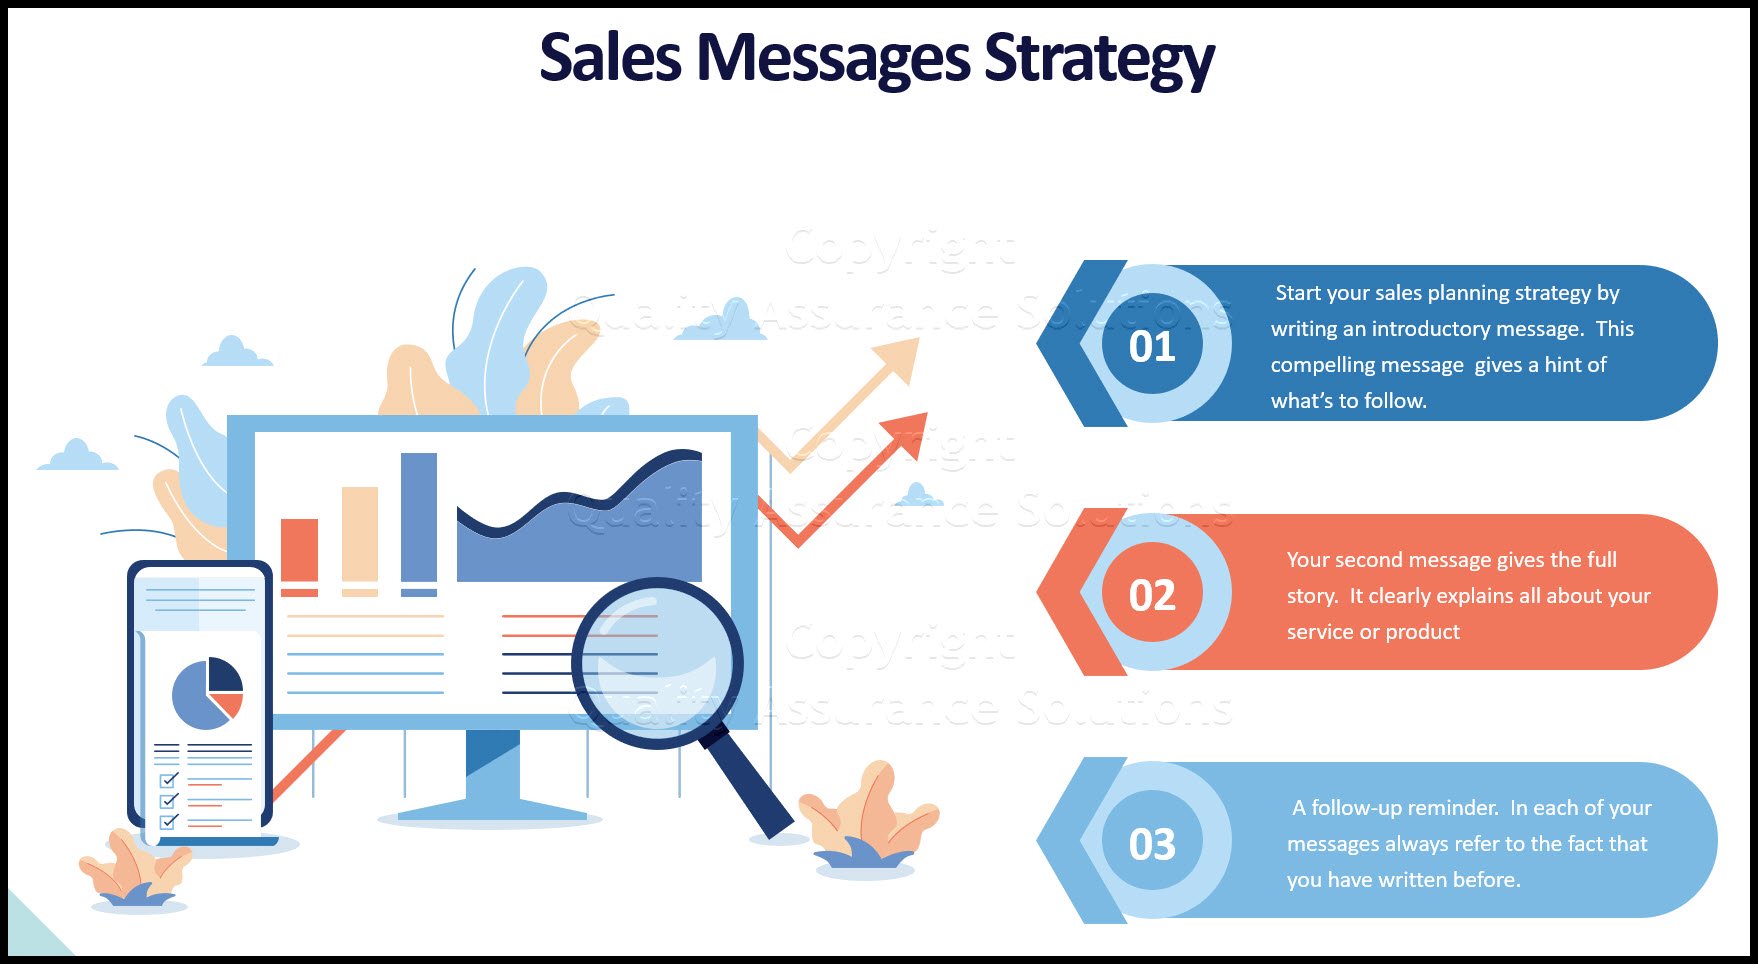 Important steps to include in your sales planning strategy.